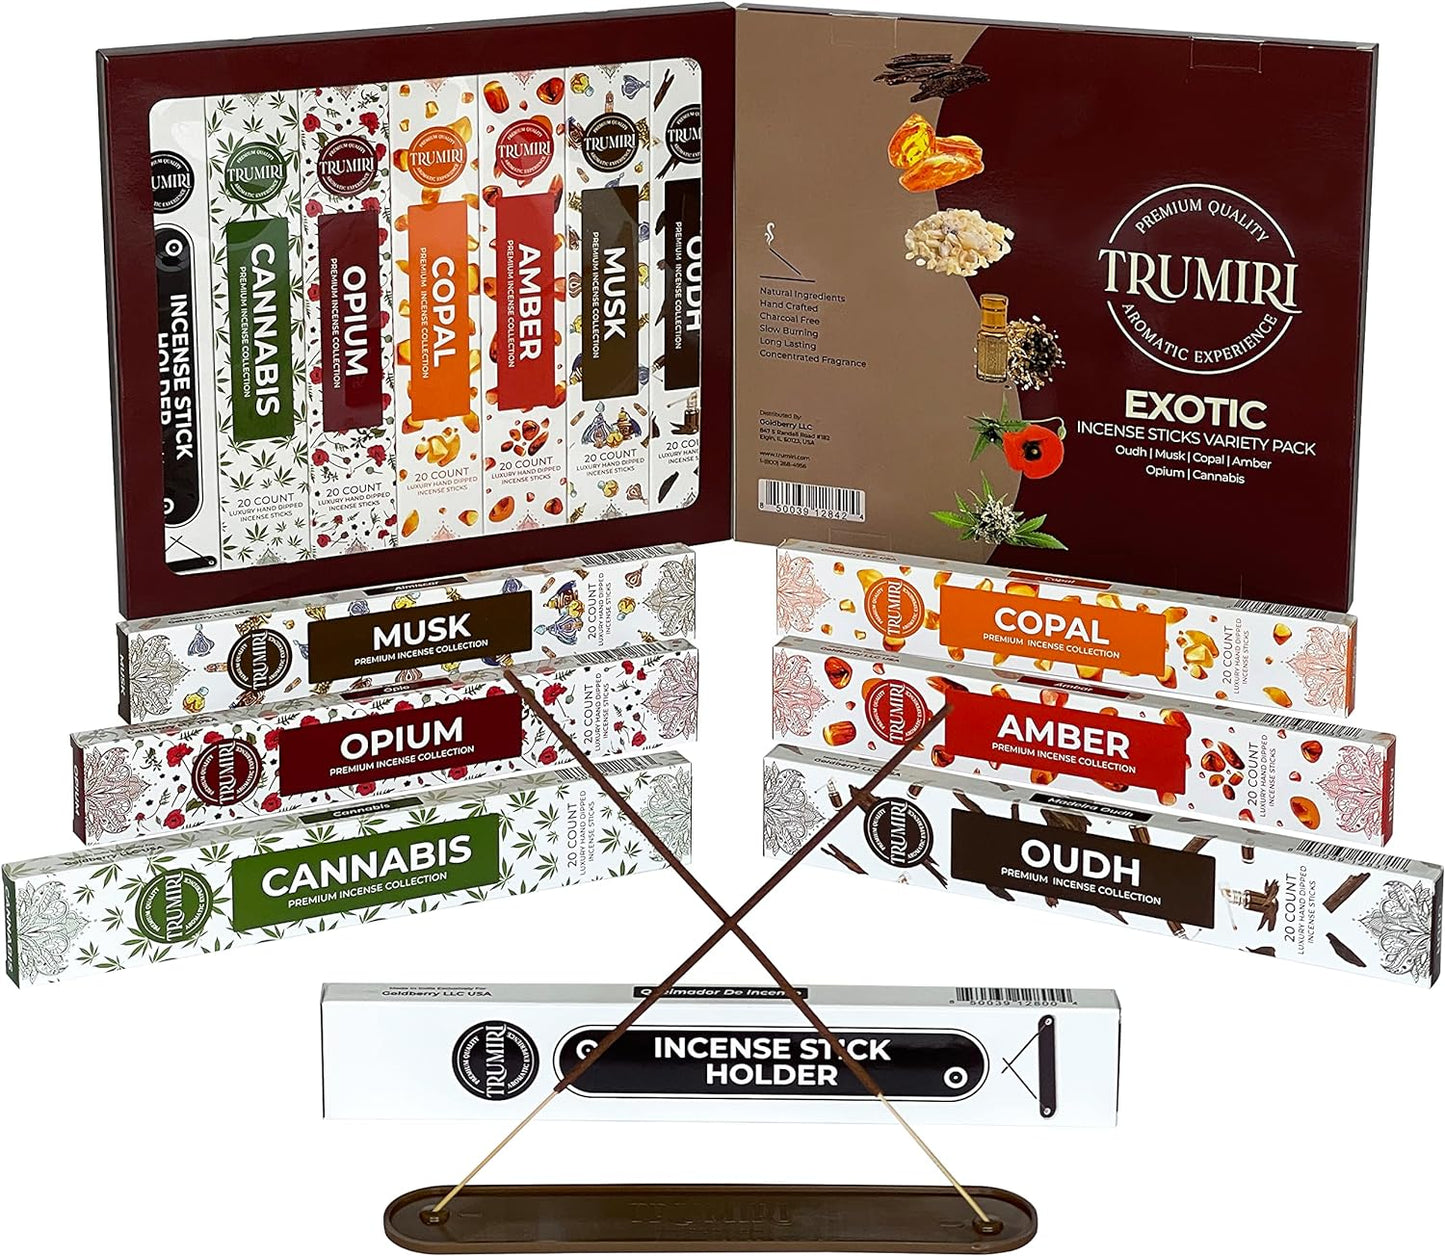 Exotic Incense Sticks Variety Pack with Incense Holder